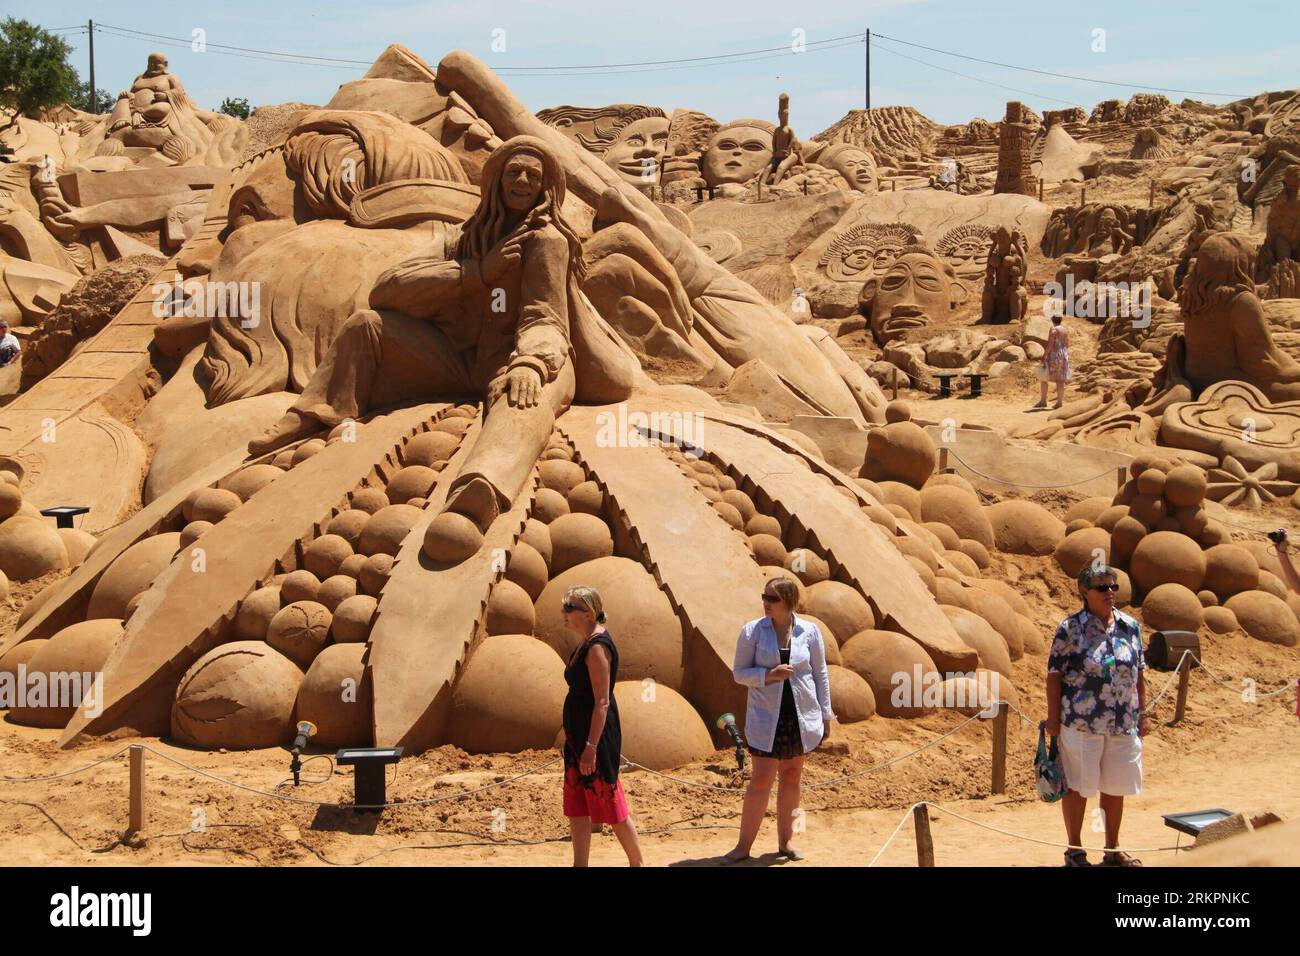 Bildnummer: 58036583  Datum: 25.05.2012  Copyright: imago/Xinhua (120526) -- LISBON, May 26, 2012 (Xinhua) -- visit the 10th International Sand Sculpture Festival in Pera, Algarve, Portugal, May 25, 2012. Sculptures of famous were shown at the annual festival under the theme of idol . (Xinhua/Tong Bingqiang) (jl) PORTUGAL-ALGARVE-PERA-SAND ART PUBLICATIONxNOTxINxCHN Gesellschaft Sandskulpturenfestival Sandskulpturen x0x xub 2012 quer      58036583 Date 25 05 2012 Copyright Imago XINHUA  Lisbon May 26 2012 XINHUA Visit The 10th International Sand Sculpture Festival in Pera Algarve Portugal May Stock Photo